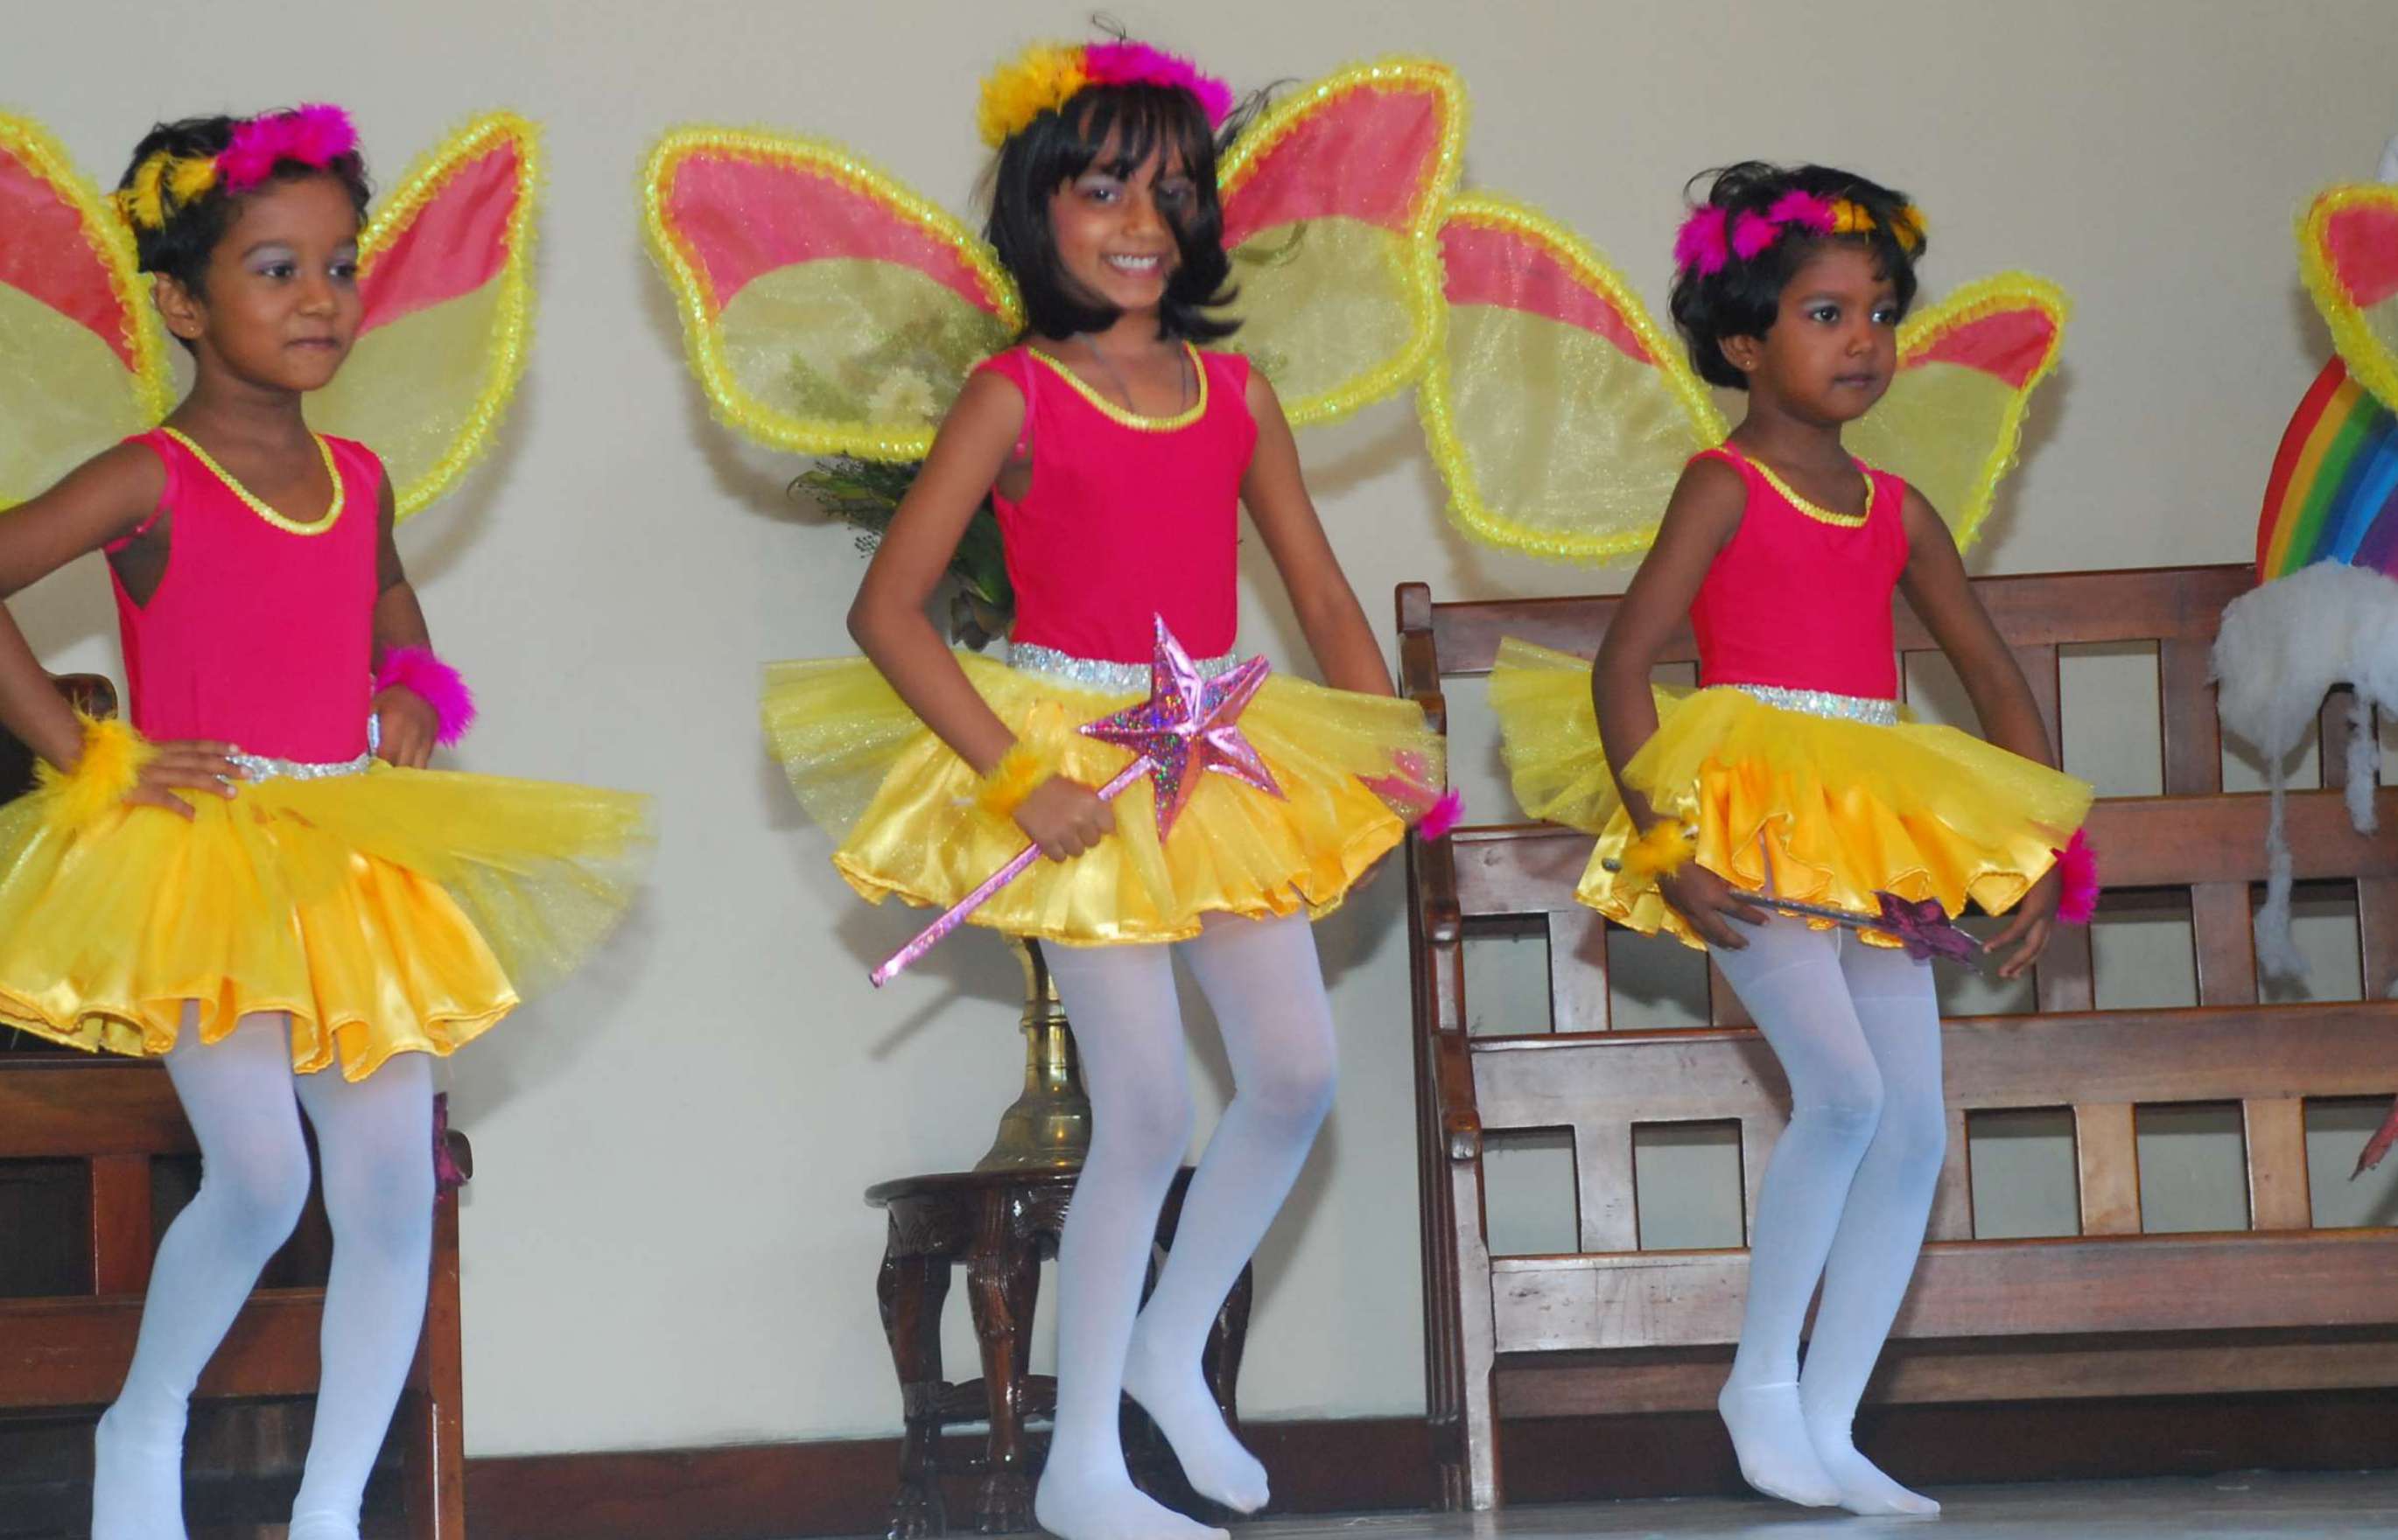 Three girls in yellow and pink tutus, white tights, and wearing yellow and pink butterfly wings perform a dance.